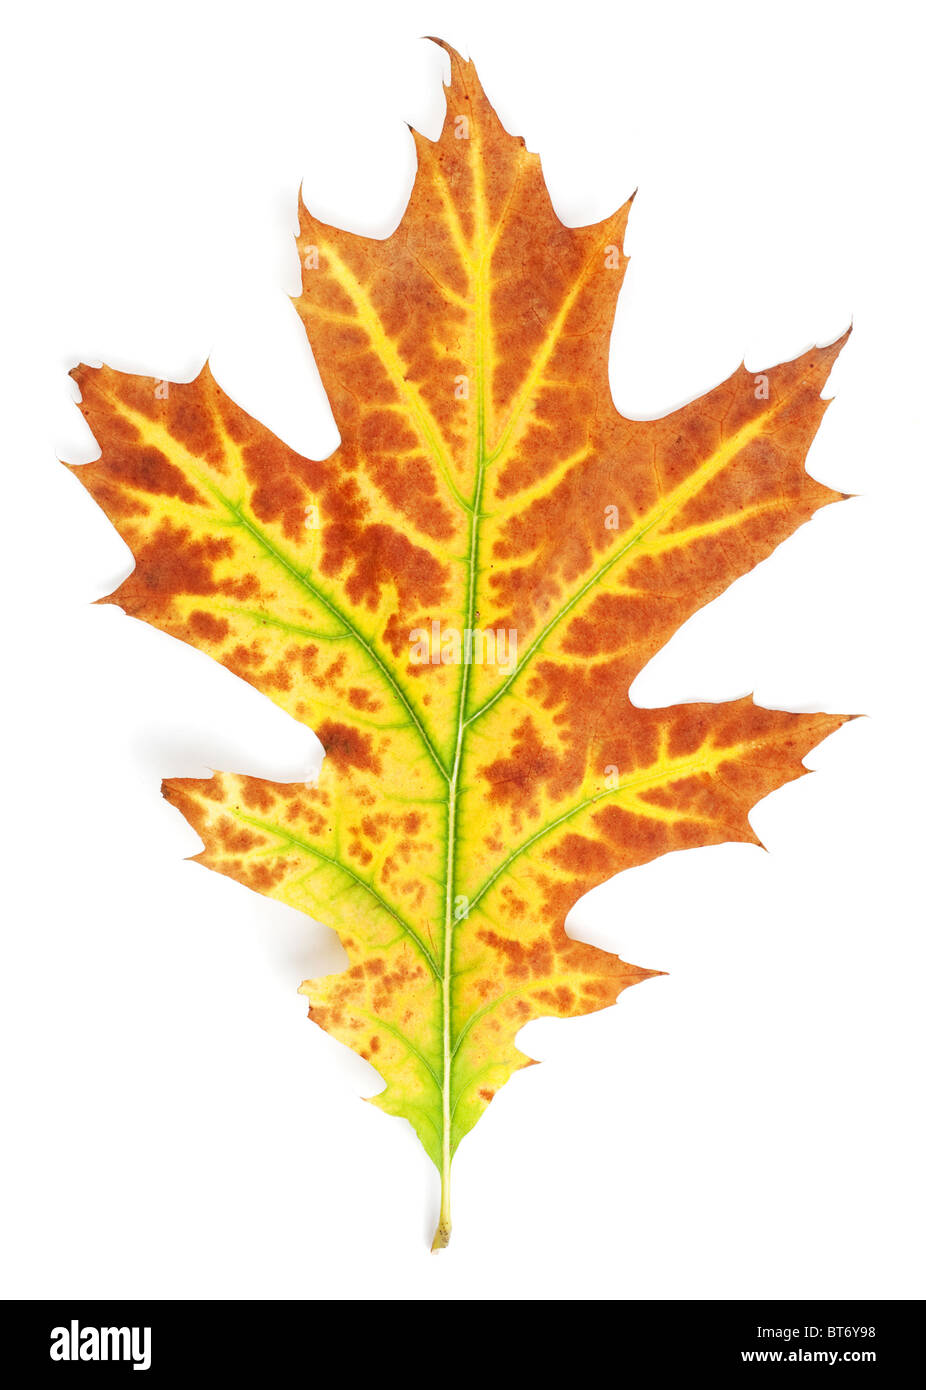 Yellow-red autumn leaf isolated on white background Stock Photo